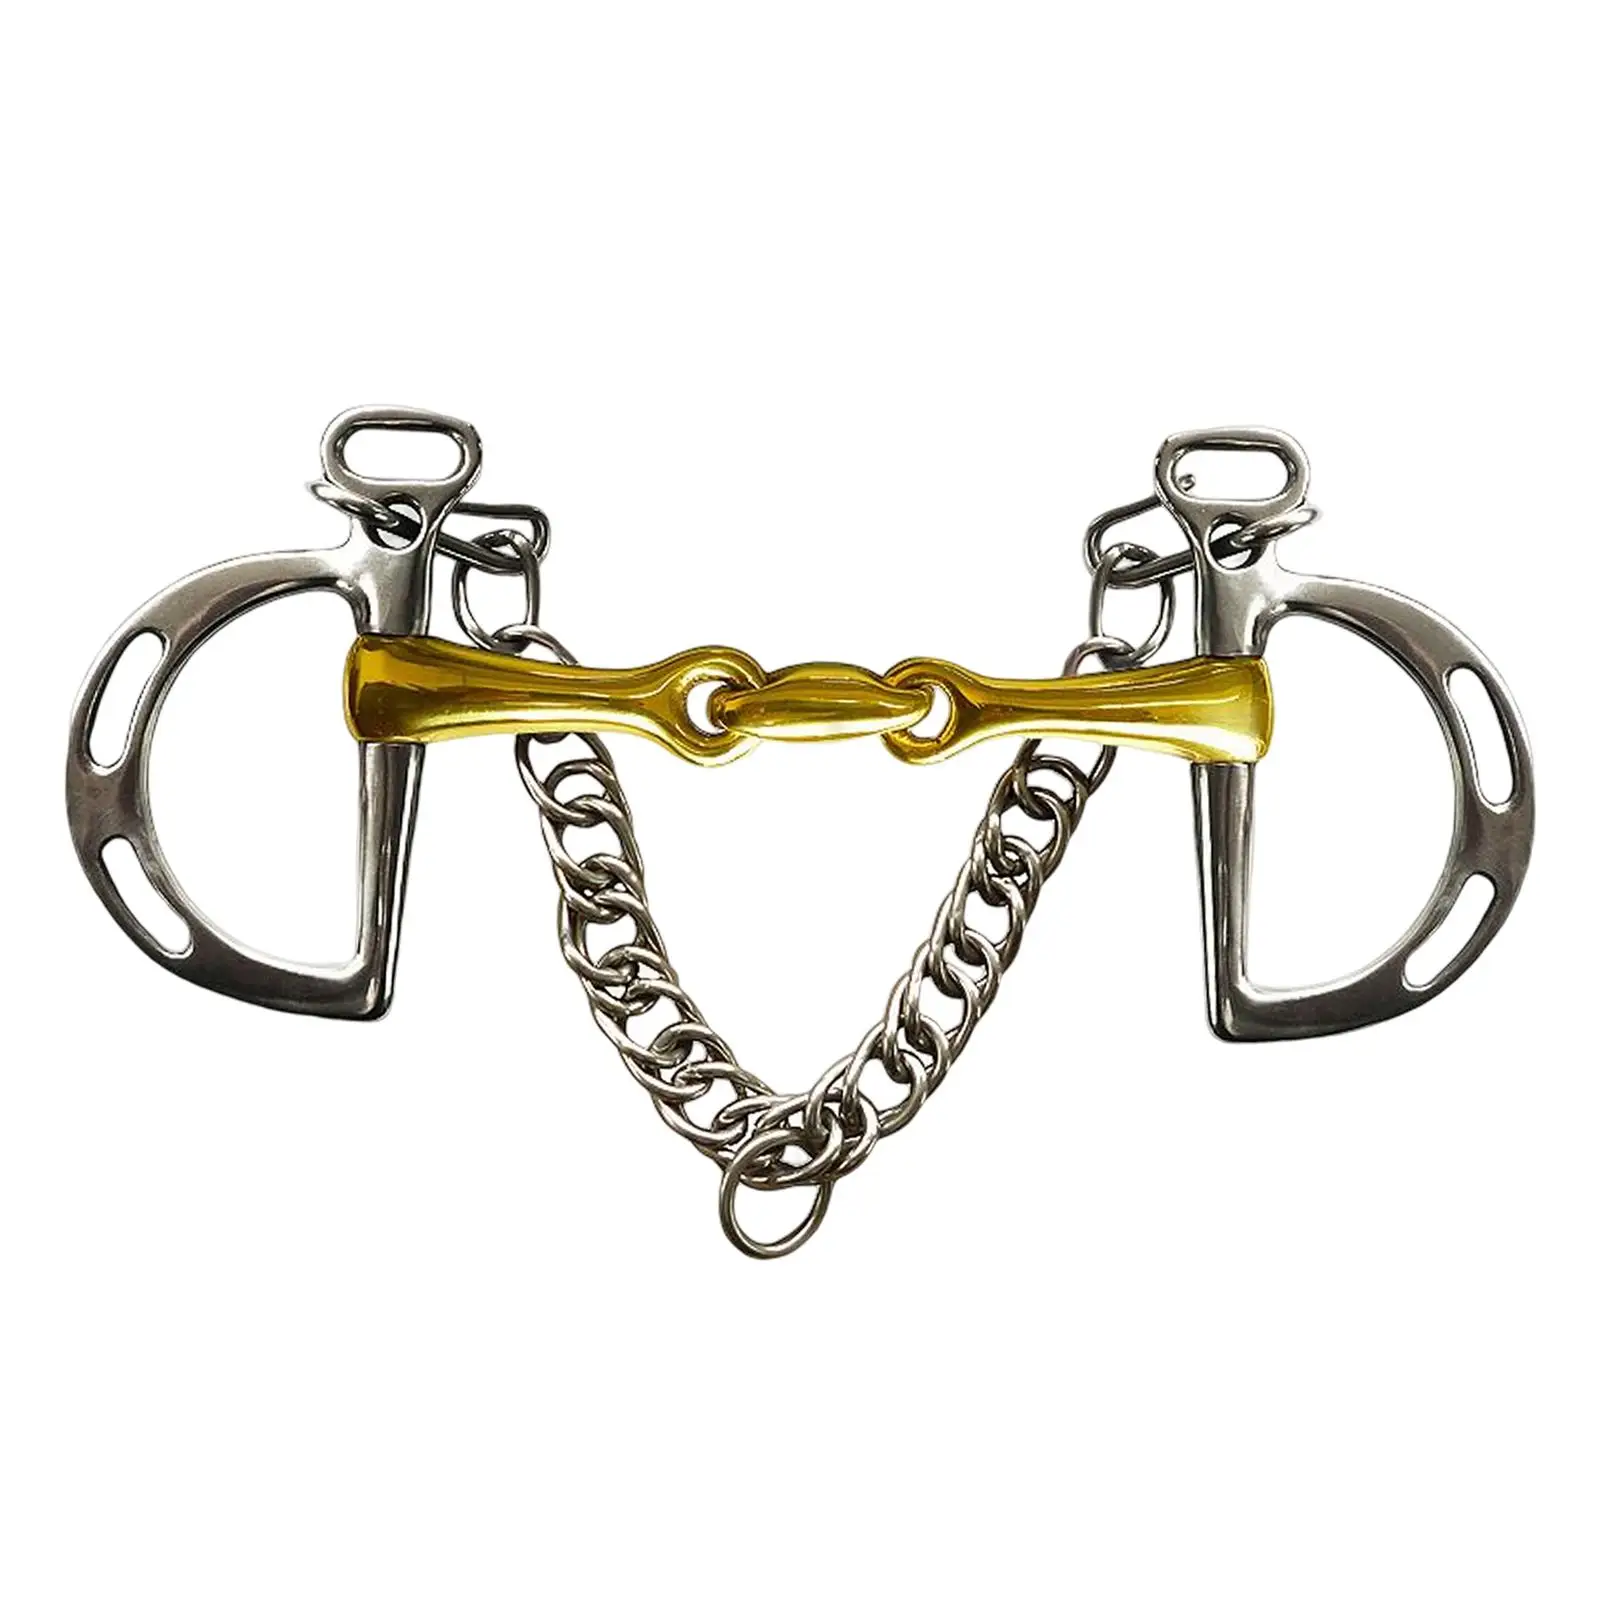 Horse Bit Copper Mouth Harness W/Curb Hooks Chain Stainless Steel Center Roller with Silver Trims for Equestrian Horse Bridle